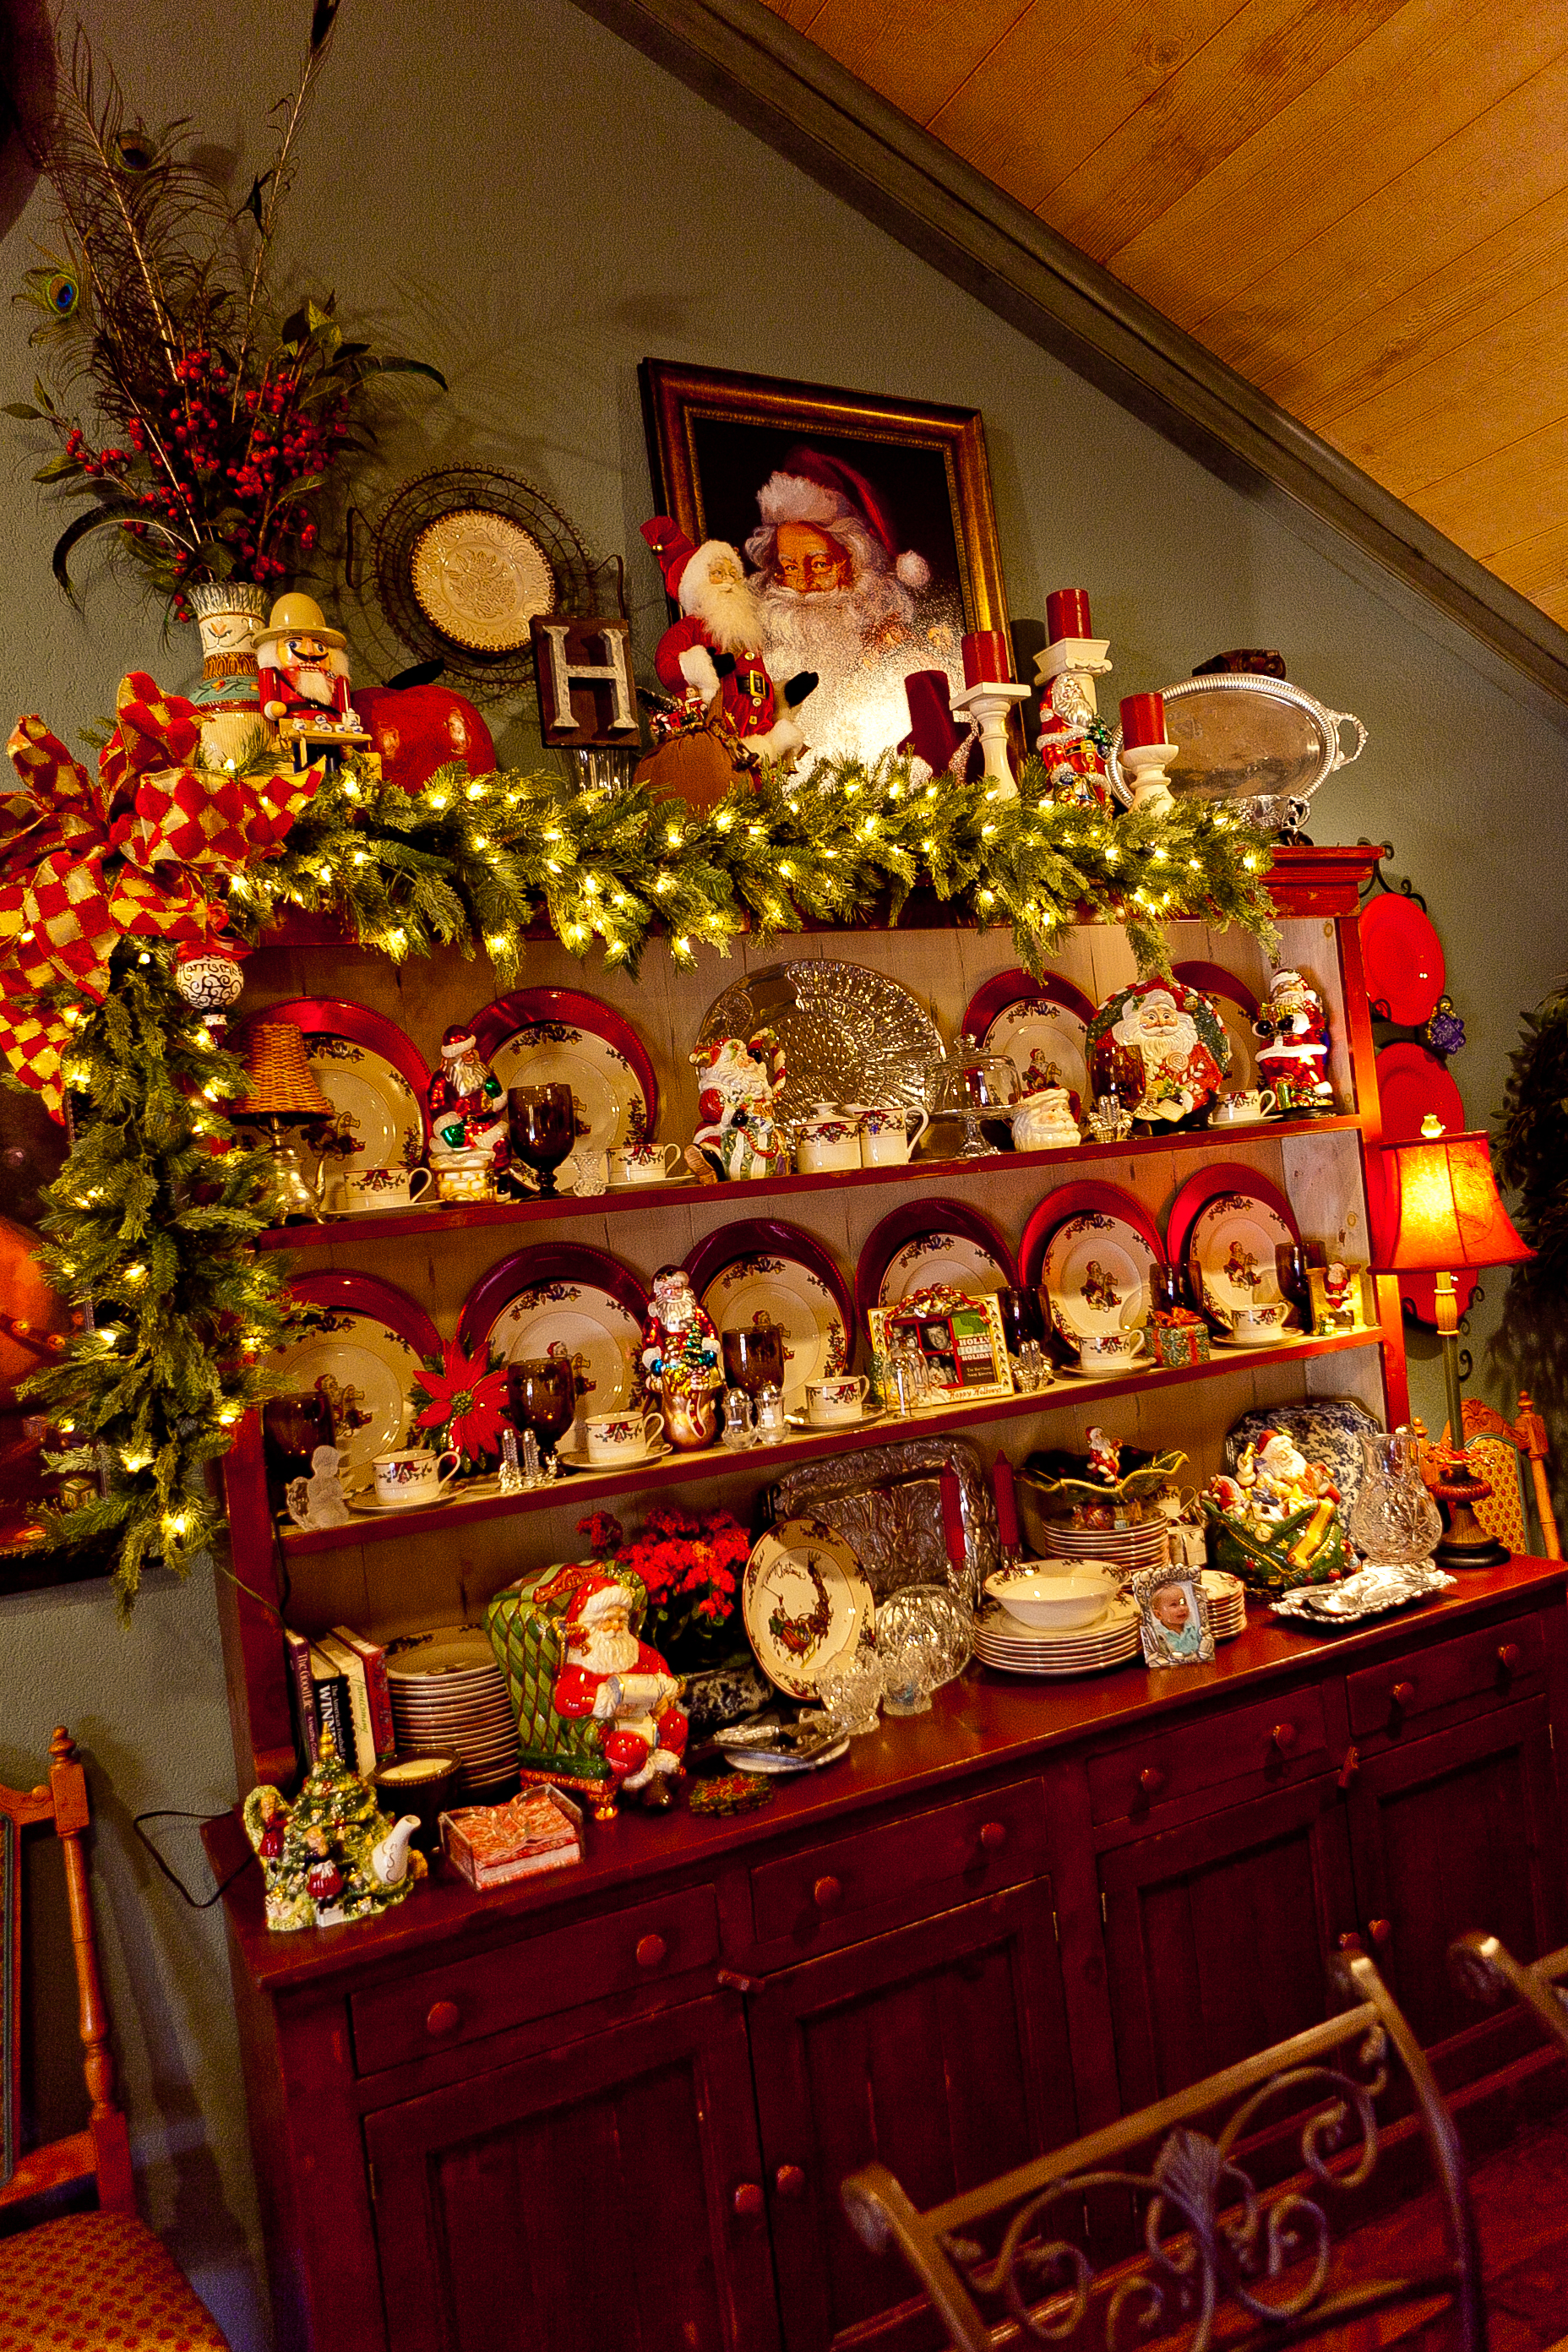 30 Country Christmas Decorations Ideas You Love To Try - Decoration Love